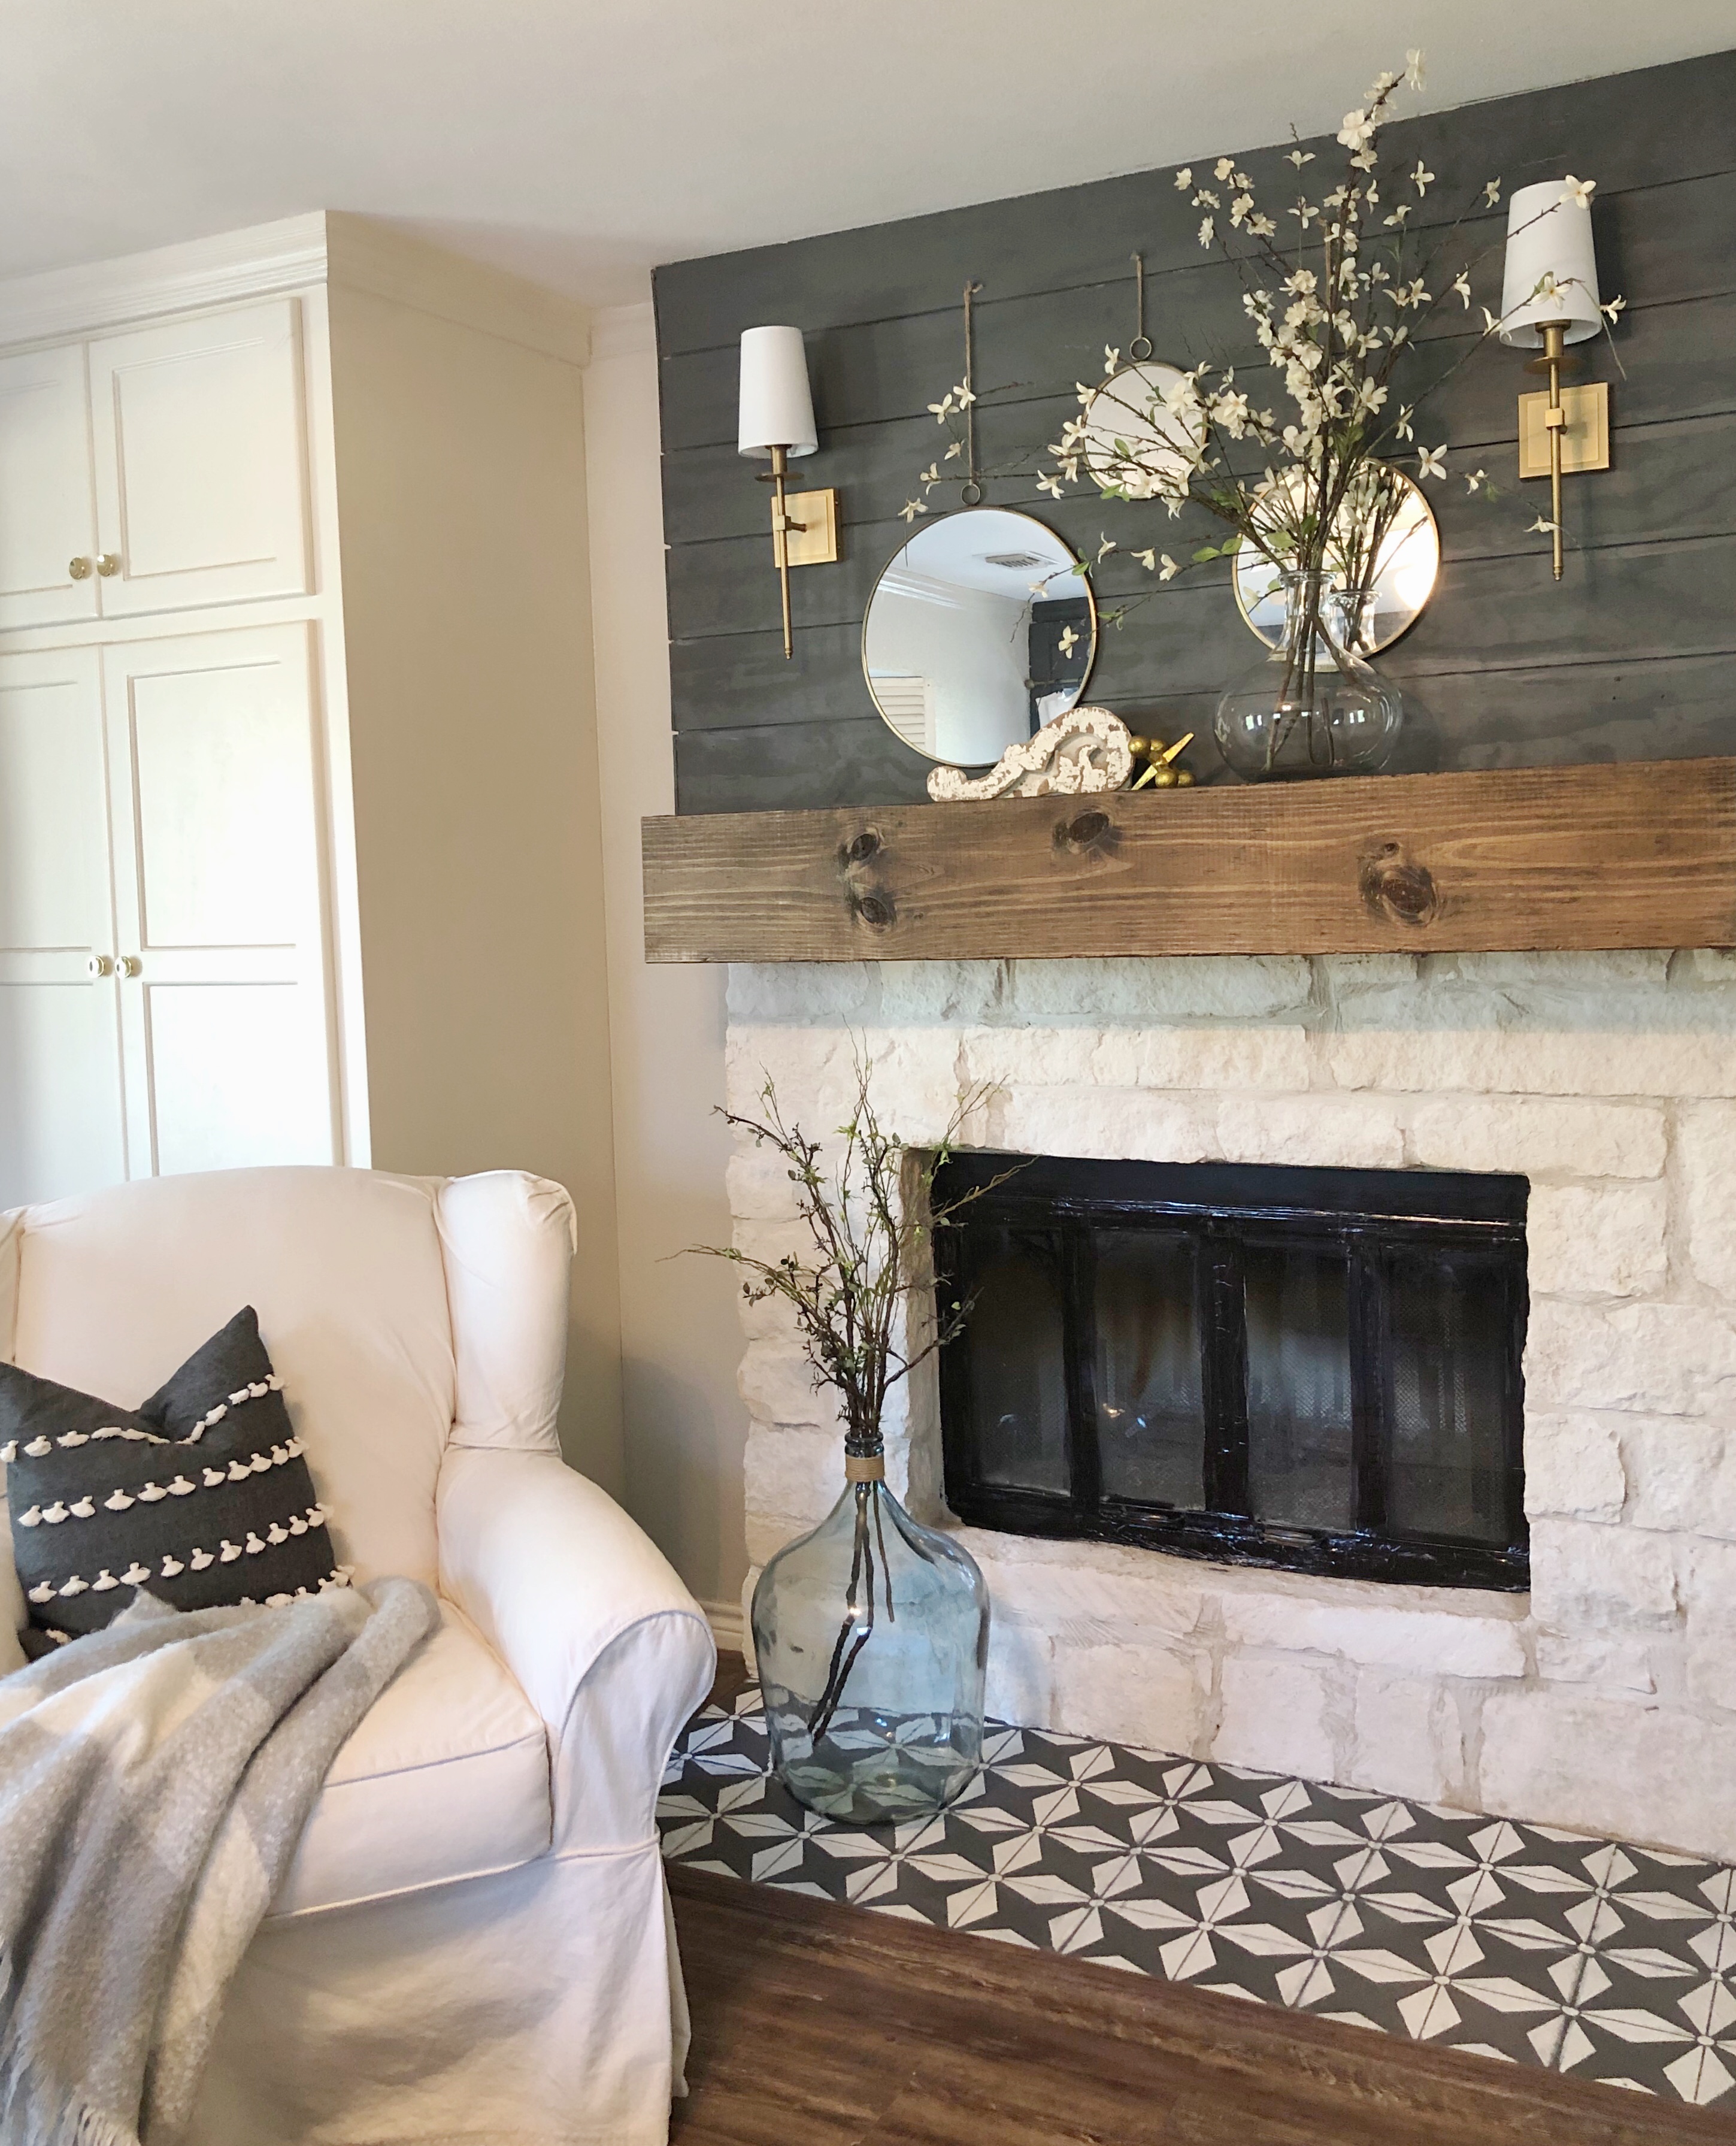 Can You Add A Fireplace to Any Home